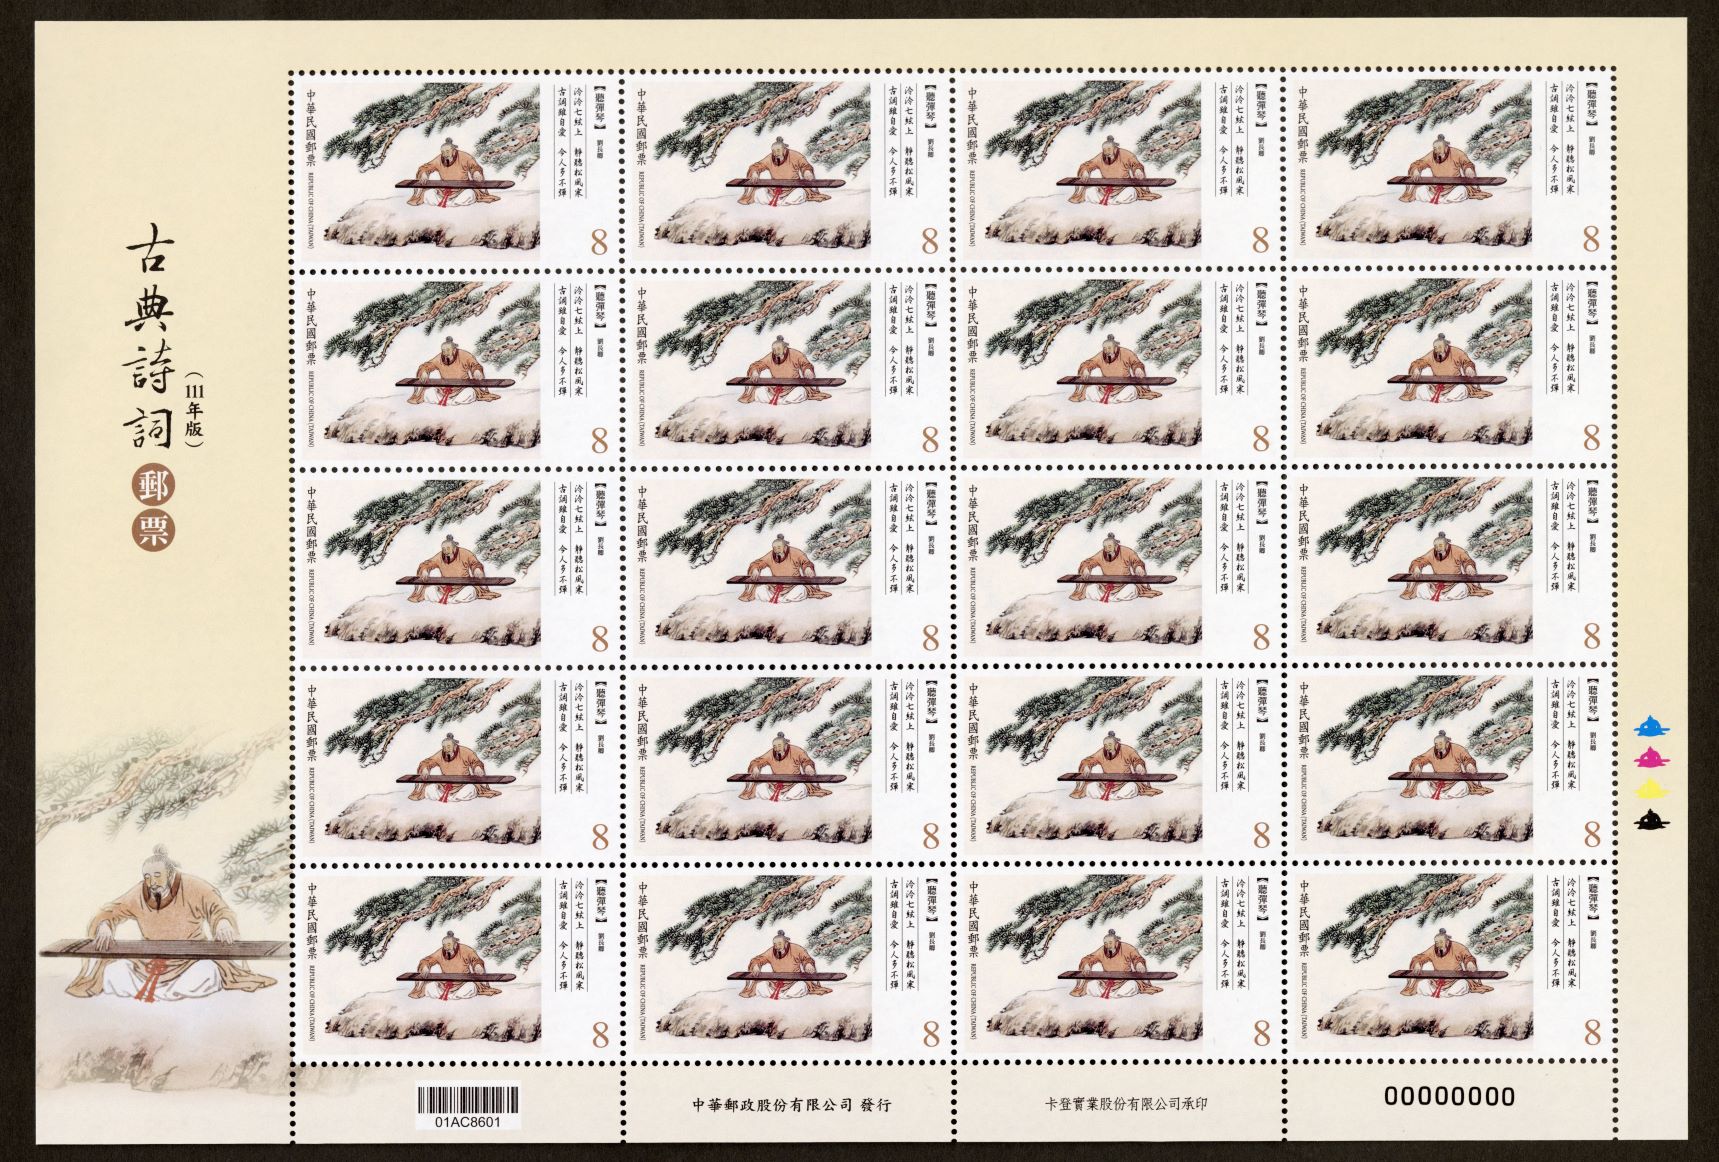 (Sp. 724.10)Sp.724 Classical Chinese Poetry Postage Stamps (Issue of 2022)